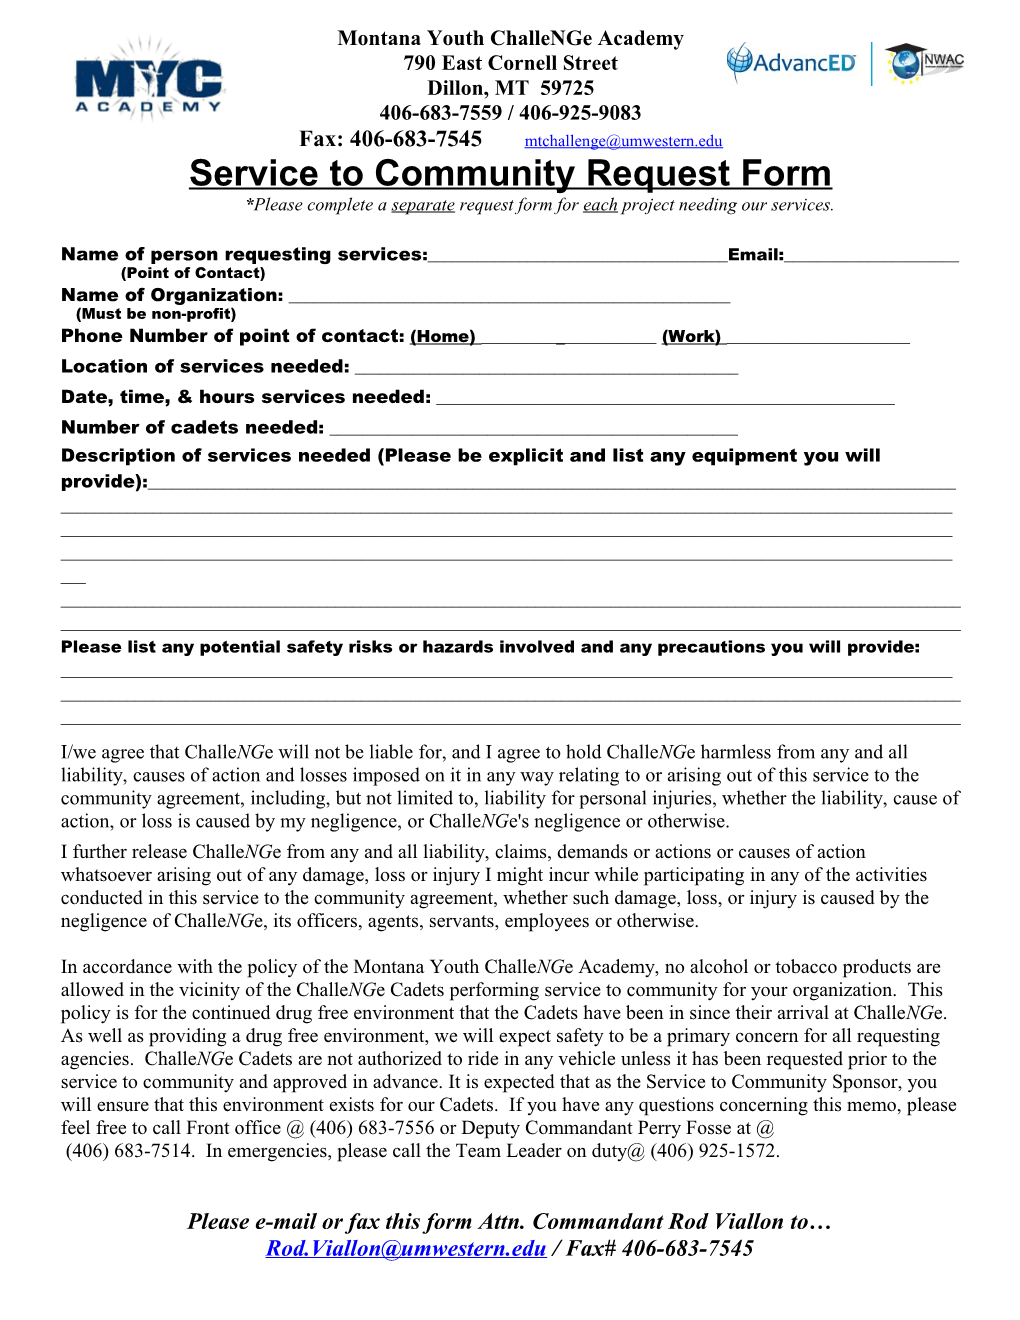 Community Service Request Form